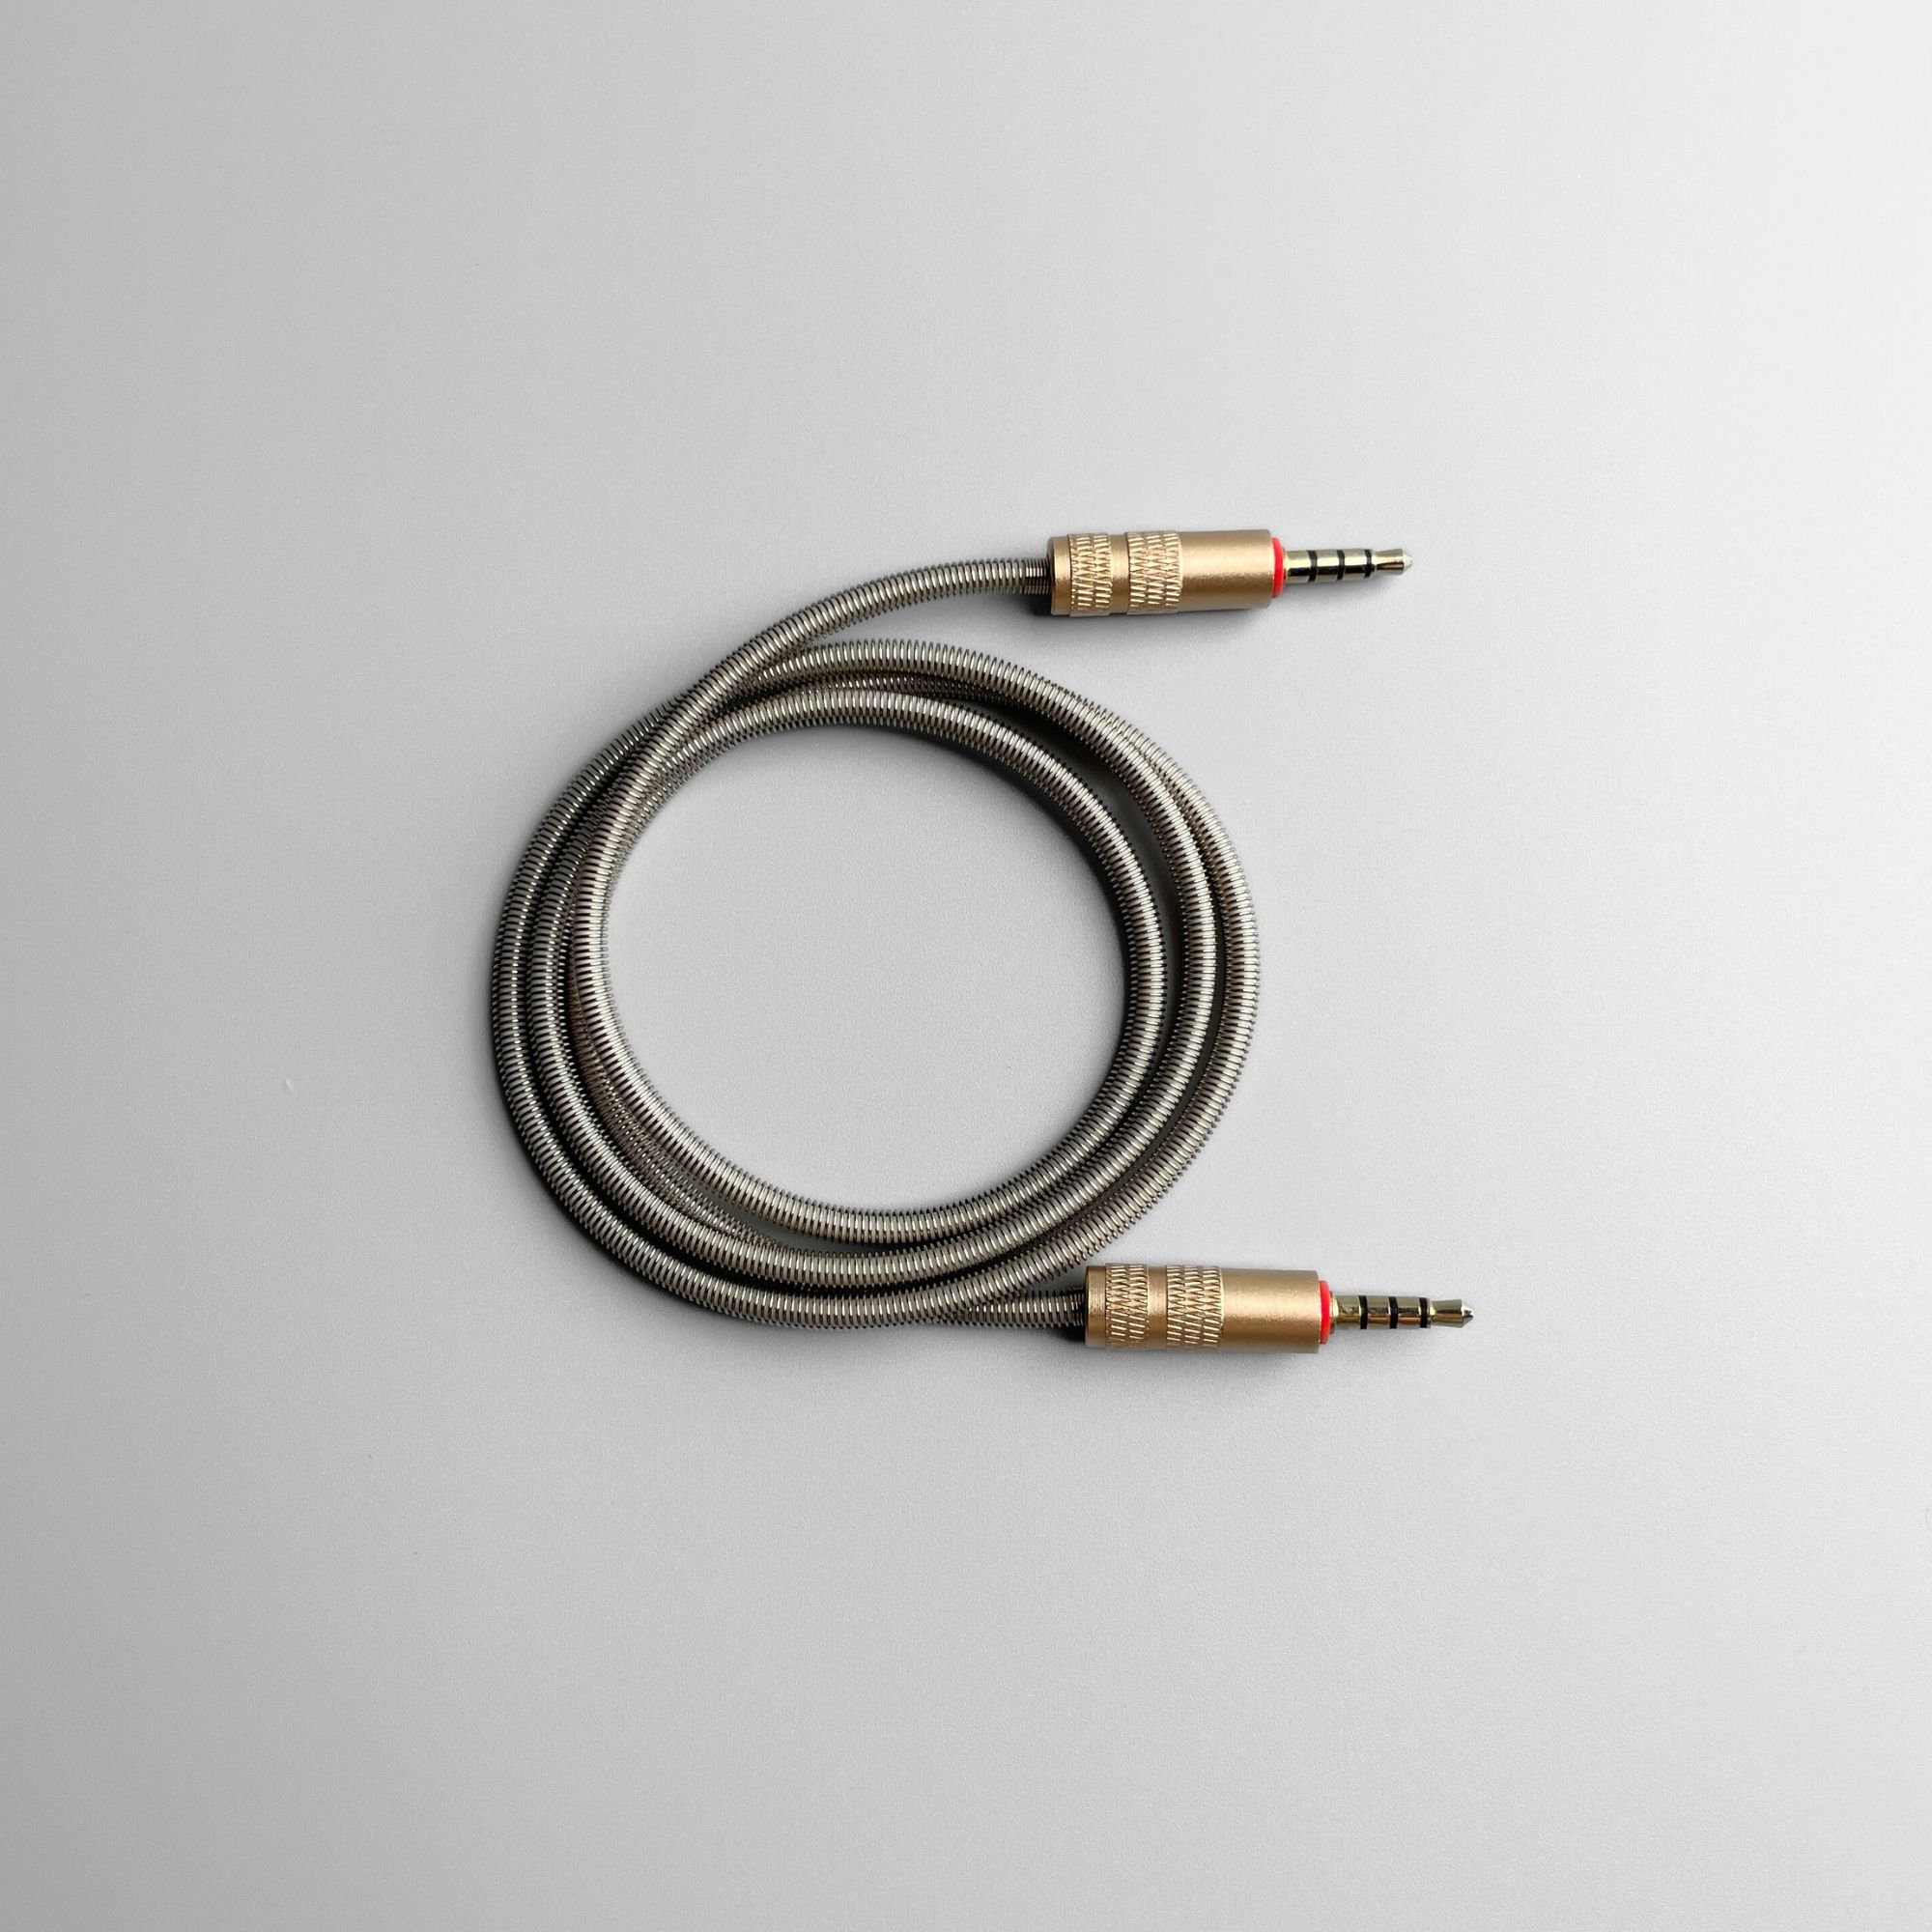 Metal TRRS cable for split keyboard